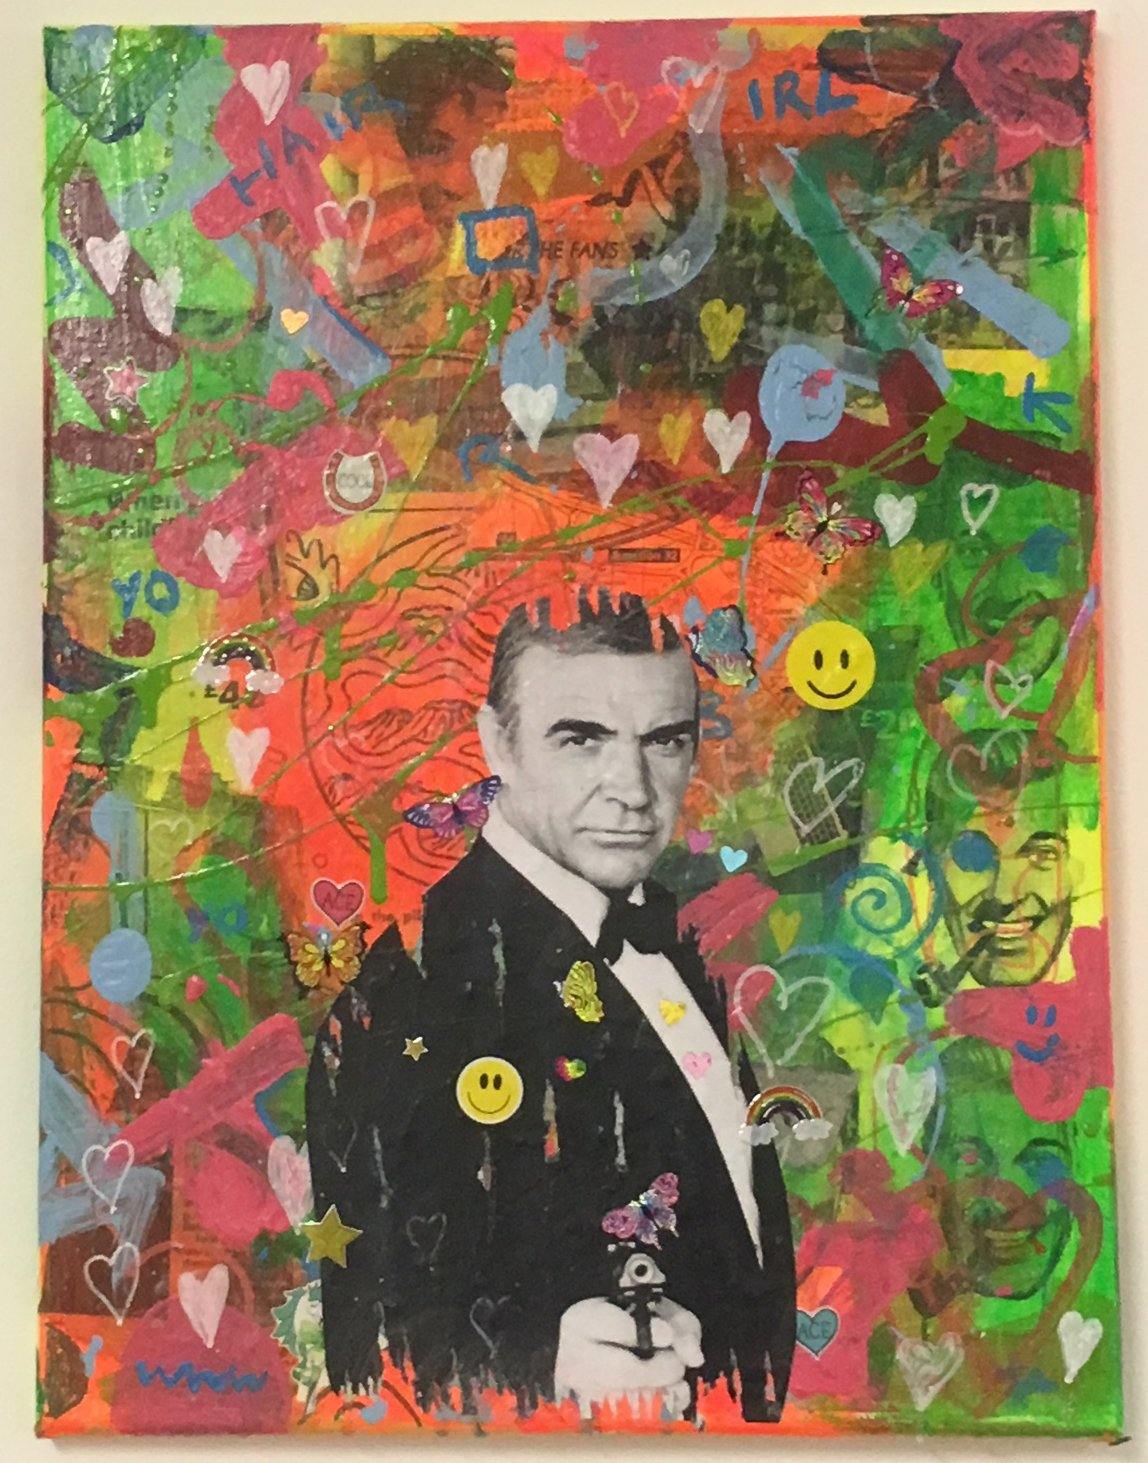 Gaze up your restlessness by Barrie J Davies 2018, mixed media on canvas, 30cm x 40cm, unframed. Barrie J Davies is an Artist - Pop Art and Street art inspired Artist based in Brighton England UK - Pop Art Paintings, Street Art Prints & Editions available. 